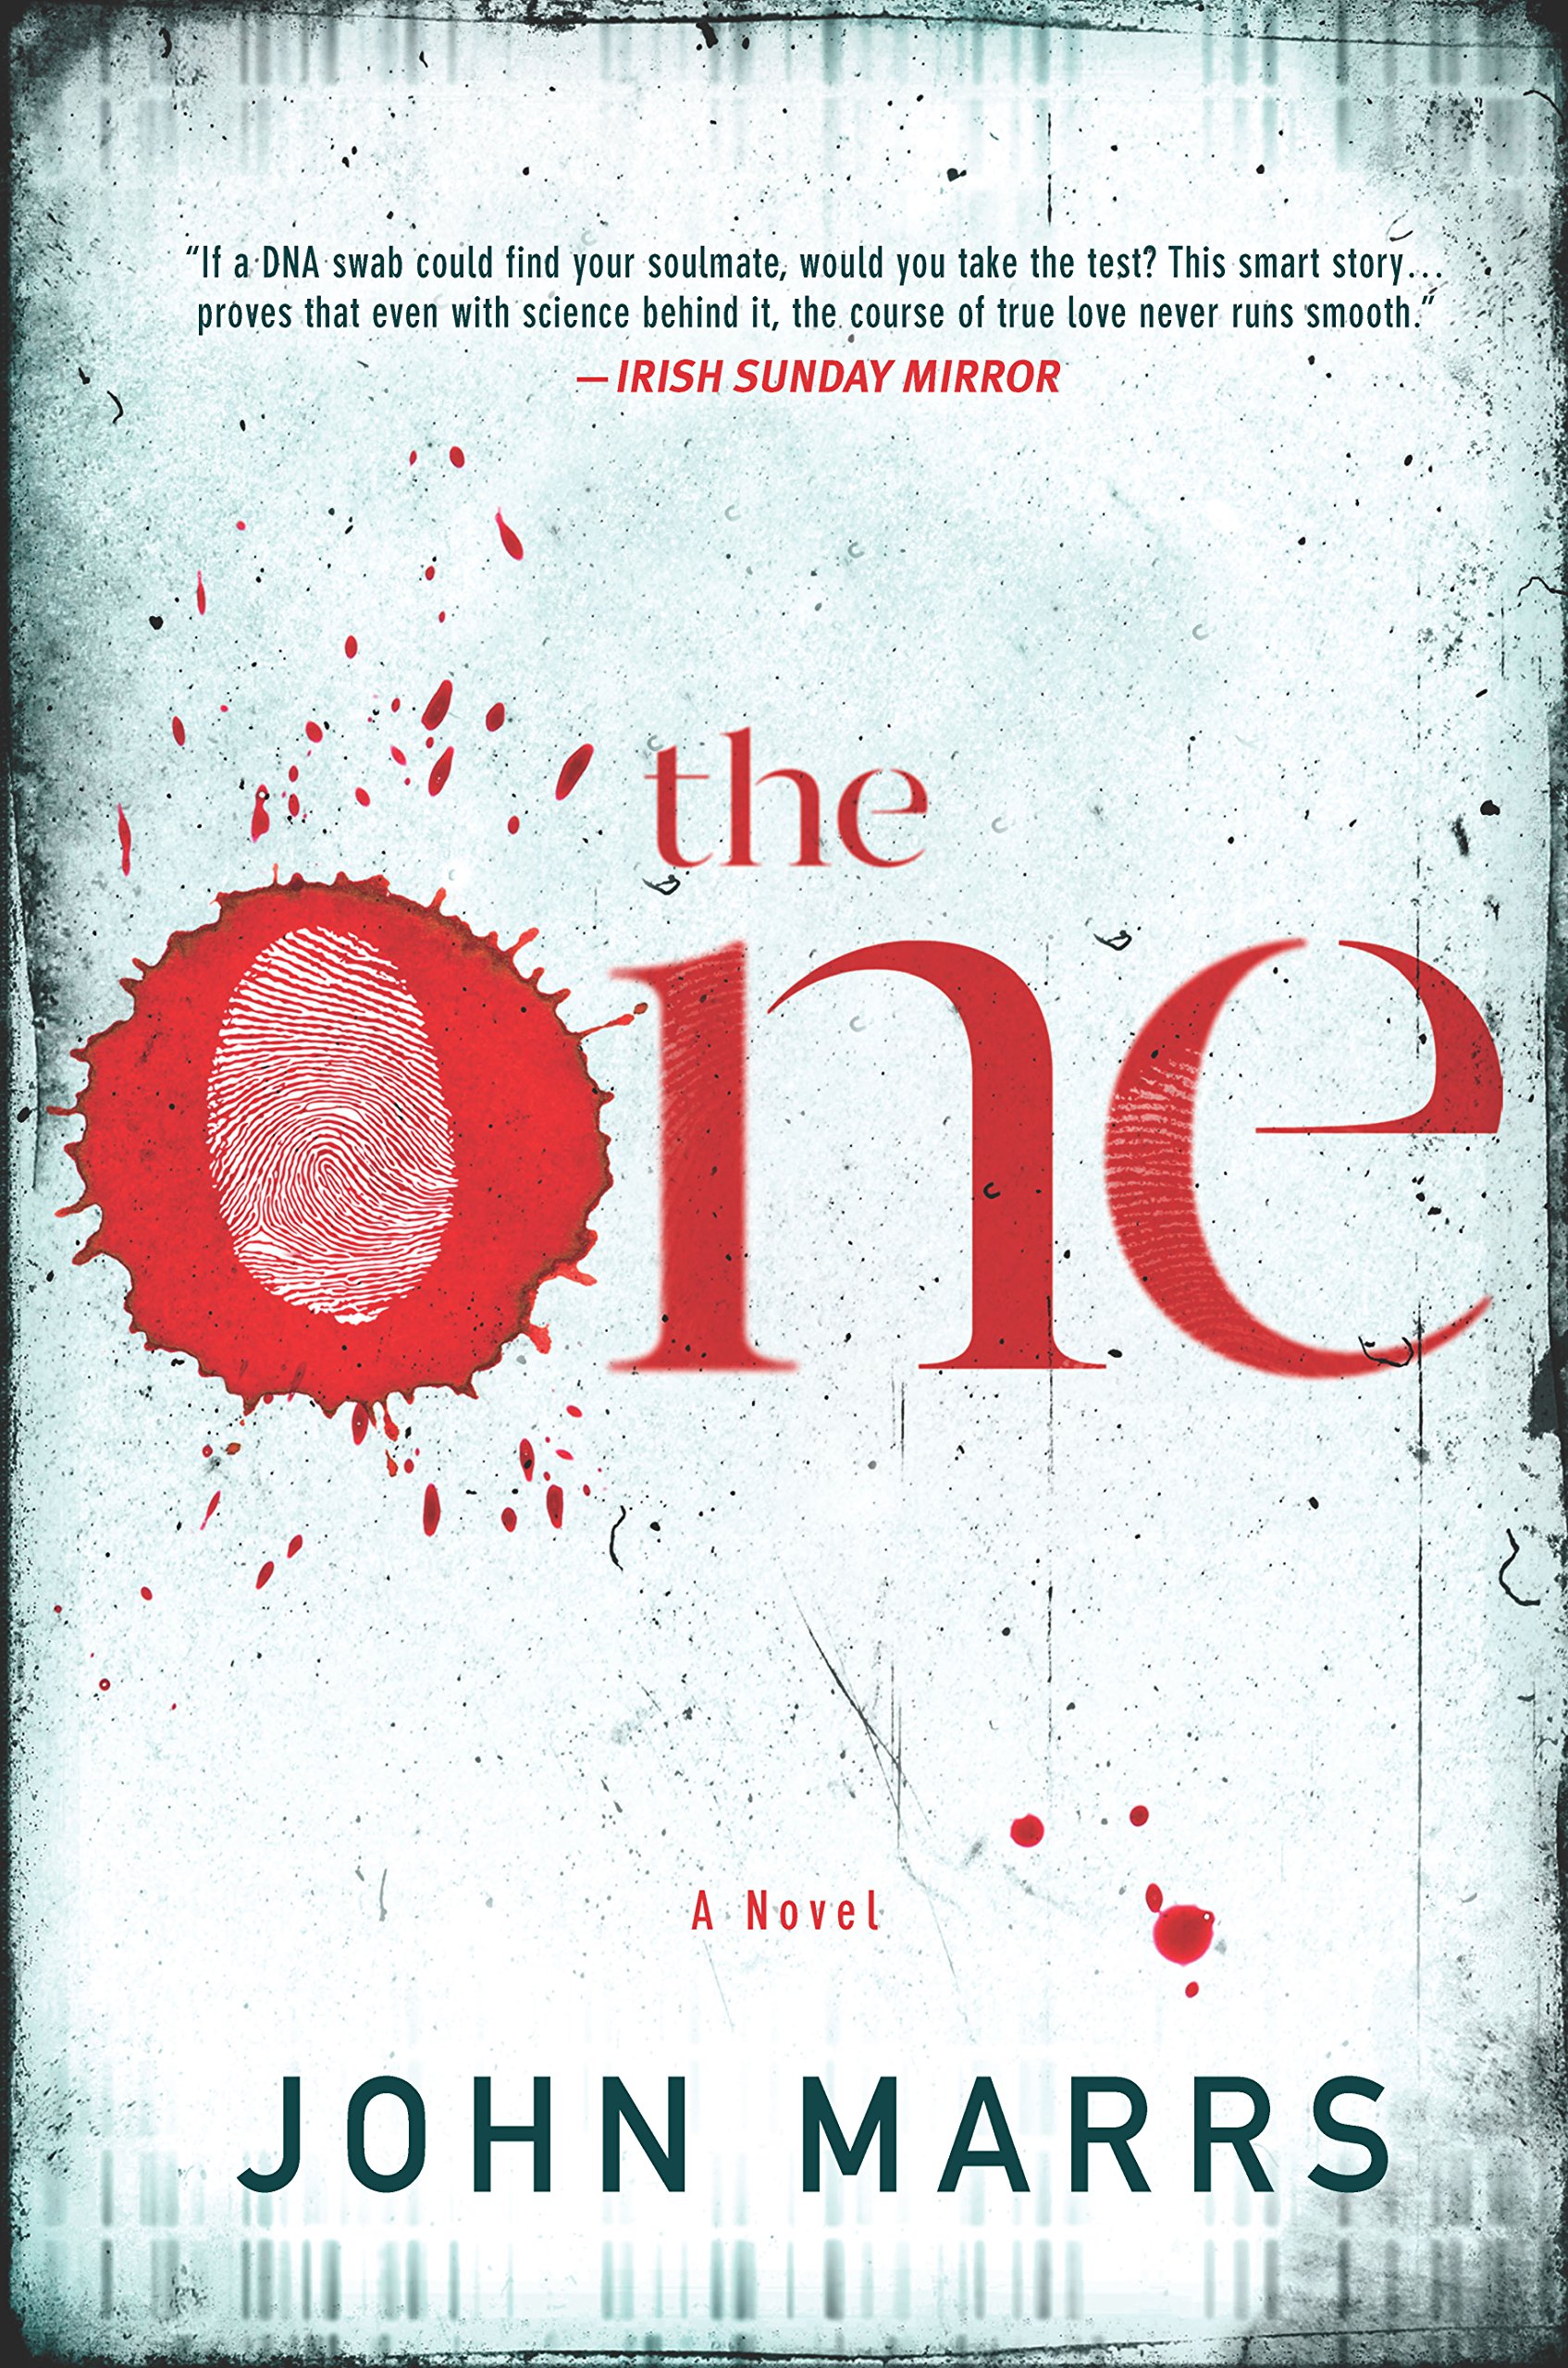 the one by john marrs